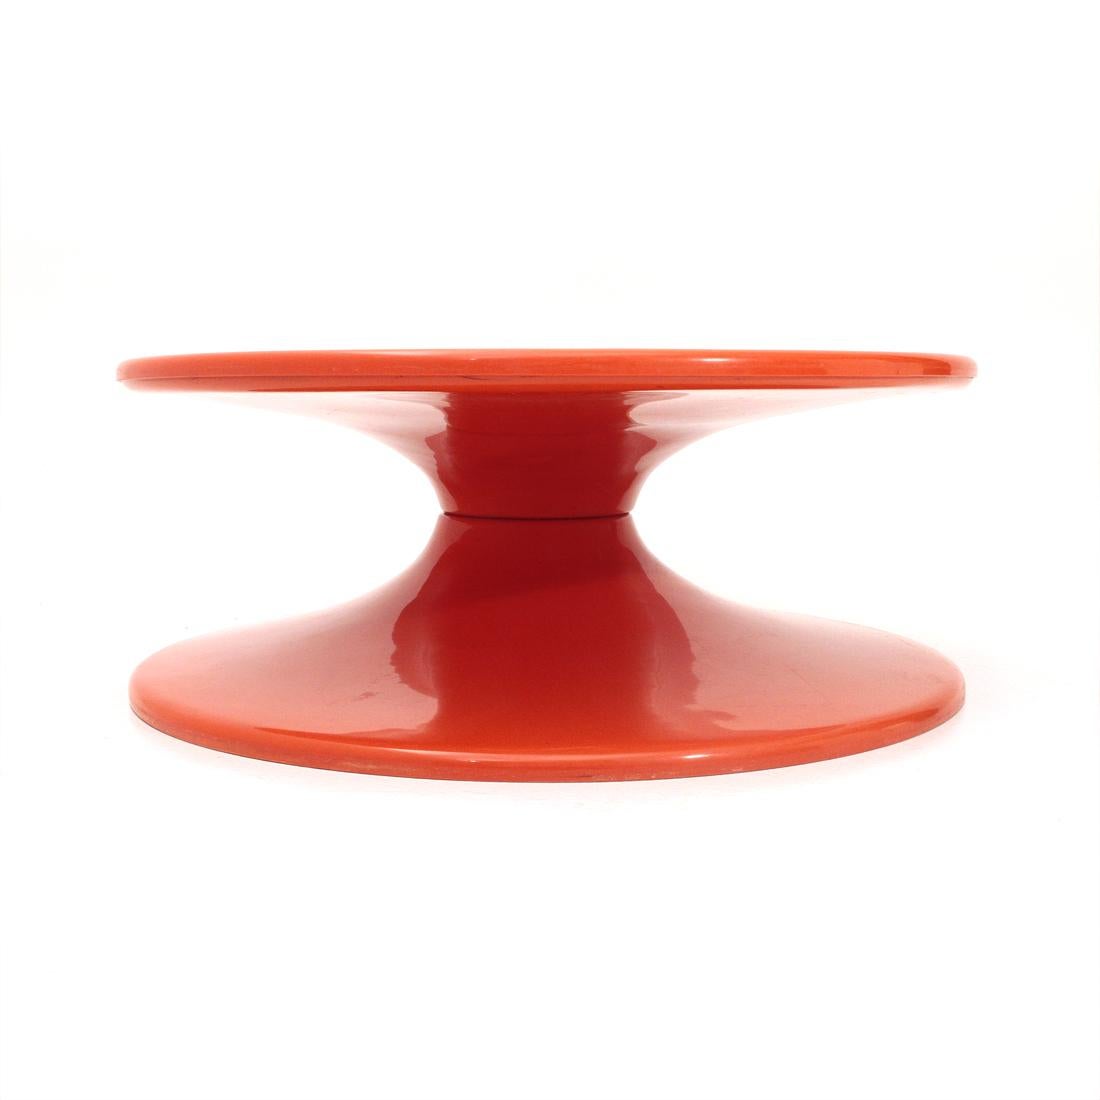 Coffee table produced in the 1970s.
Double body in orange plastic. Hole in the upper floor.
Good general conditions, some signs due to normal use over time.

Dimensions: Width 90 cm, depth 90 cm, height 35 cm.